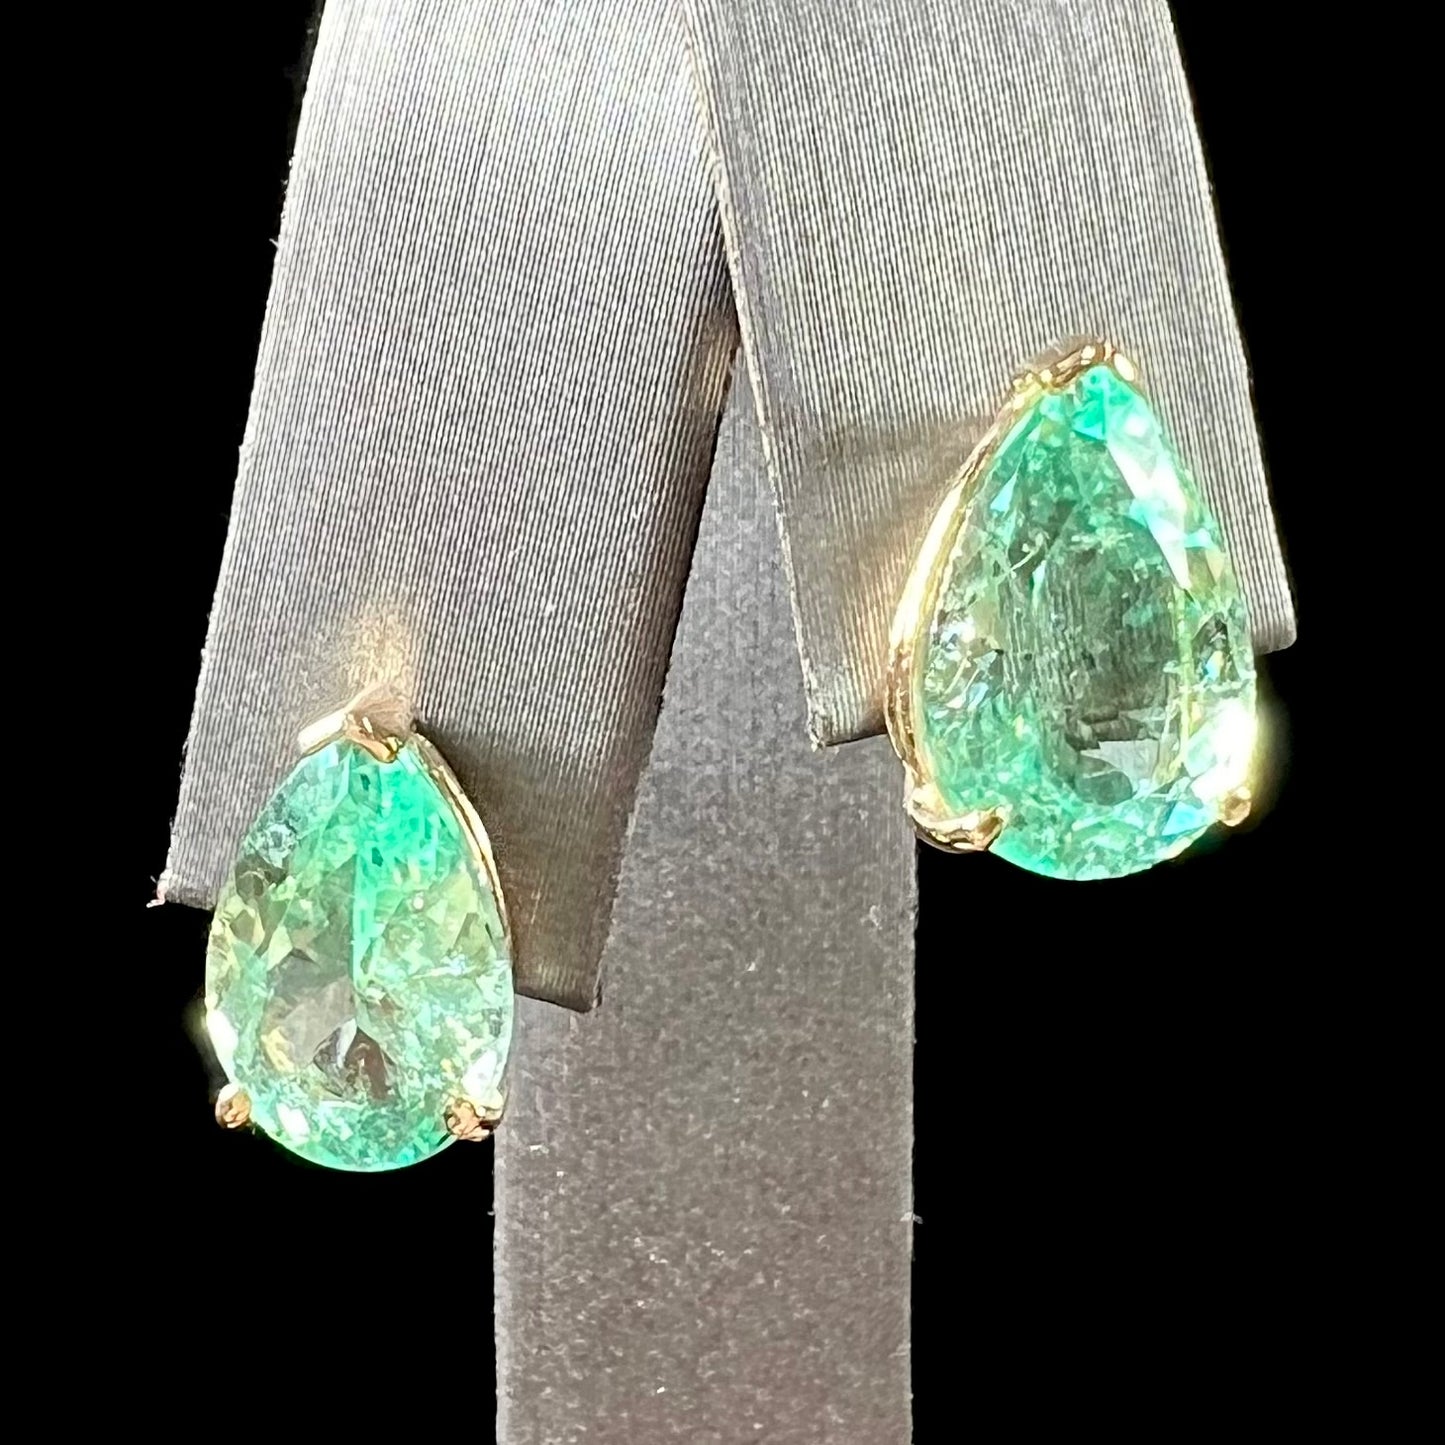 A pair of yellow gold stud earrings set with natural, pear shaped emeralds.